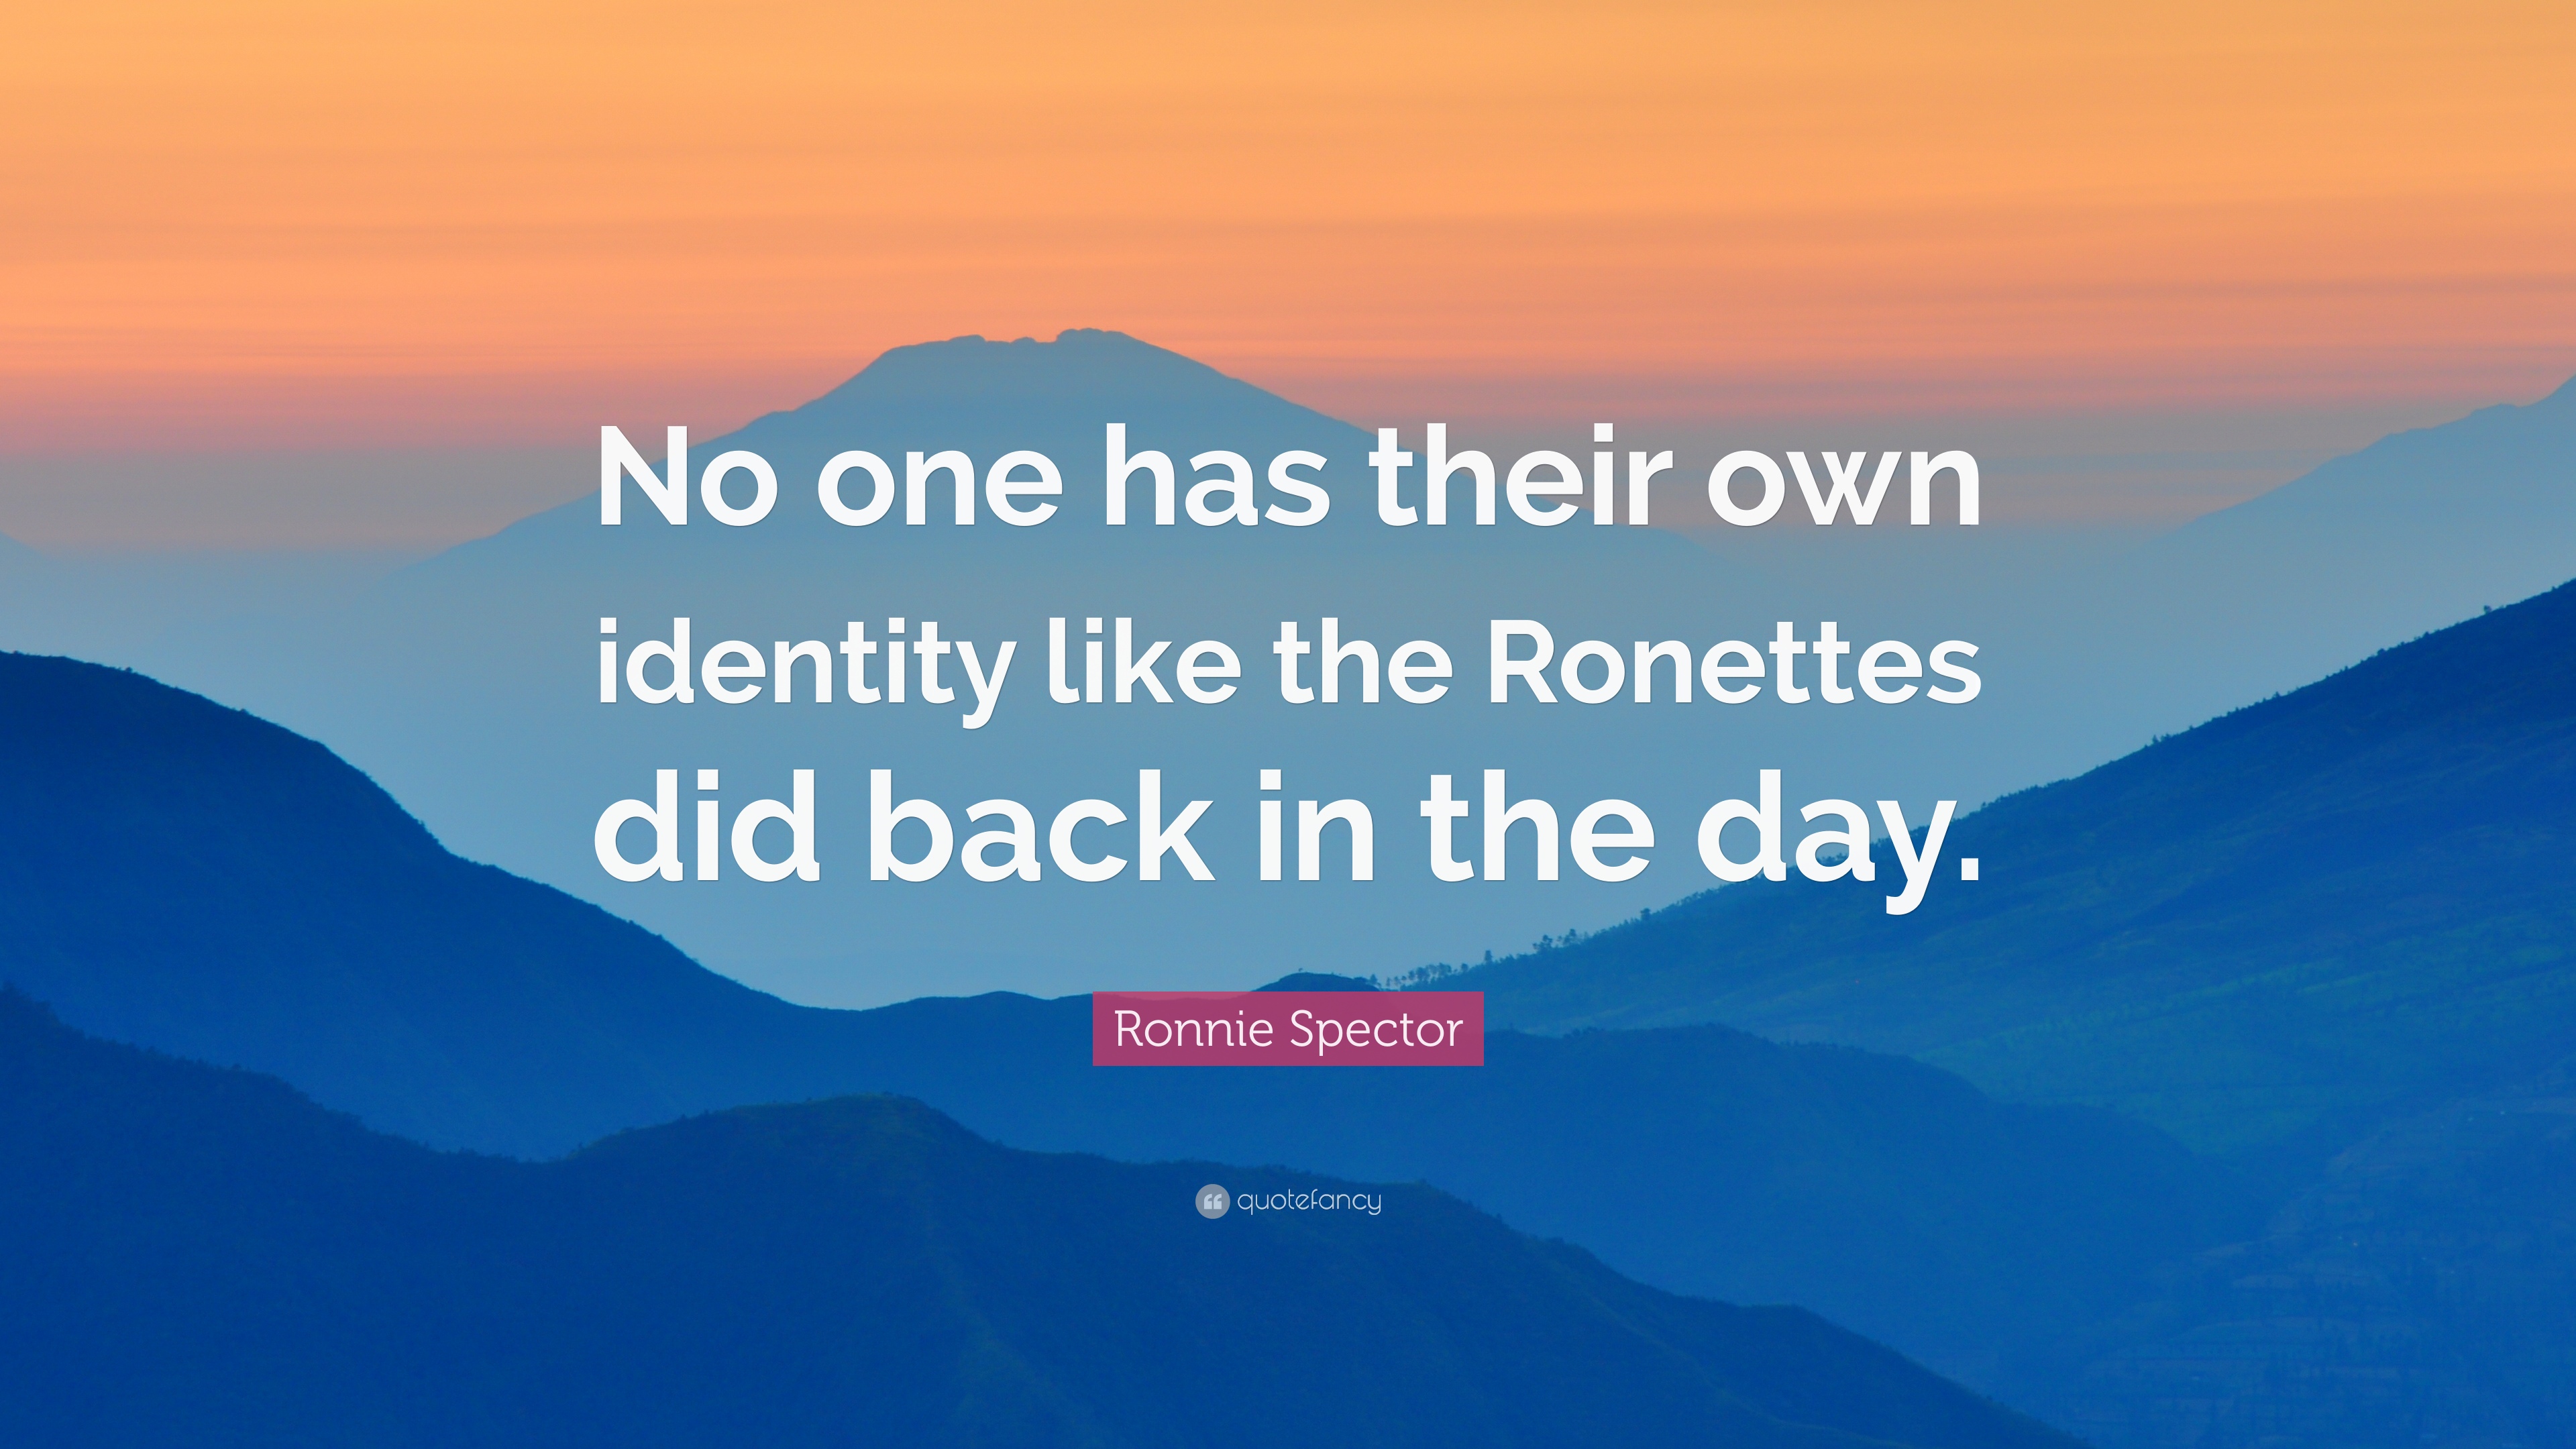 5 Ronnie Spector Quotes About The Ronettes